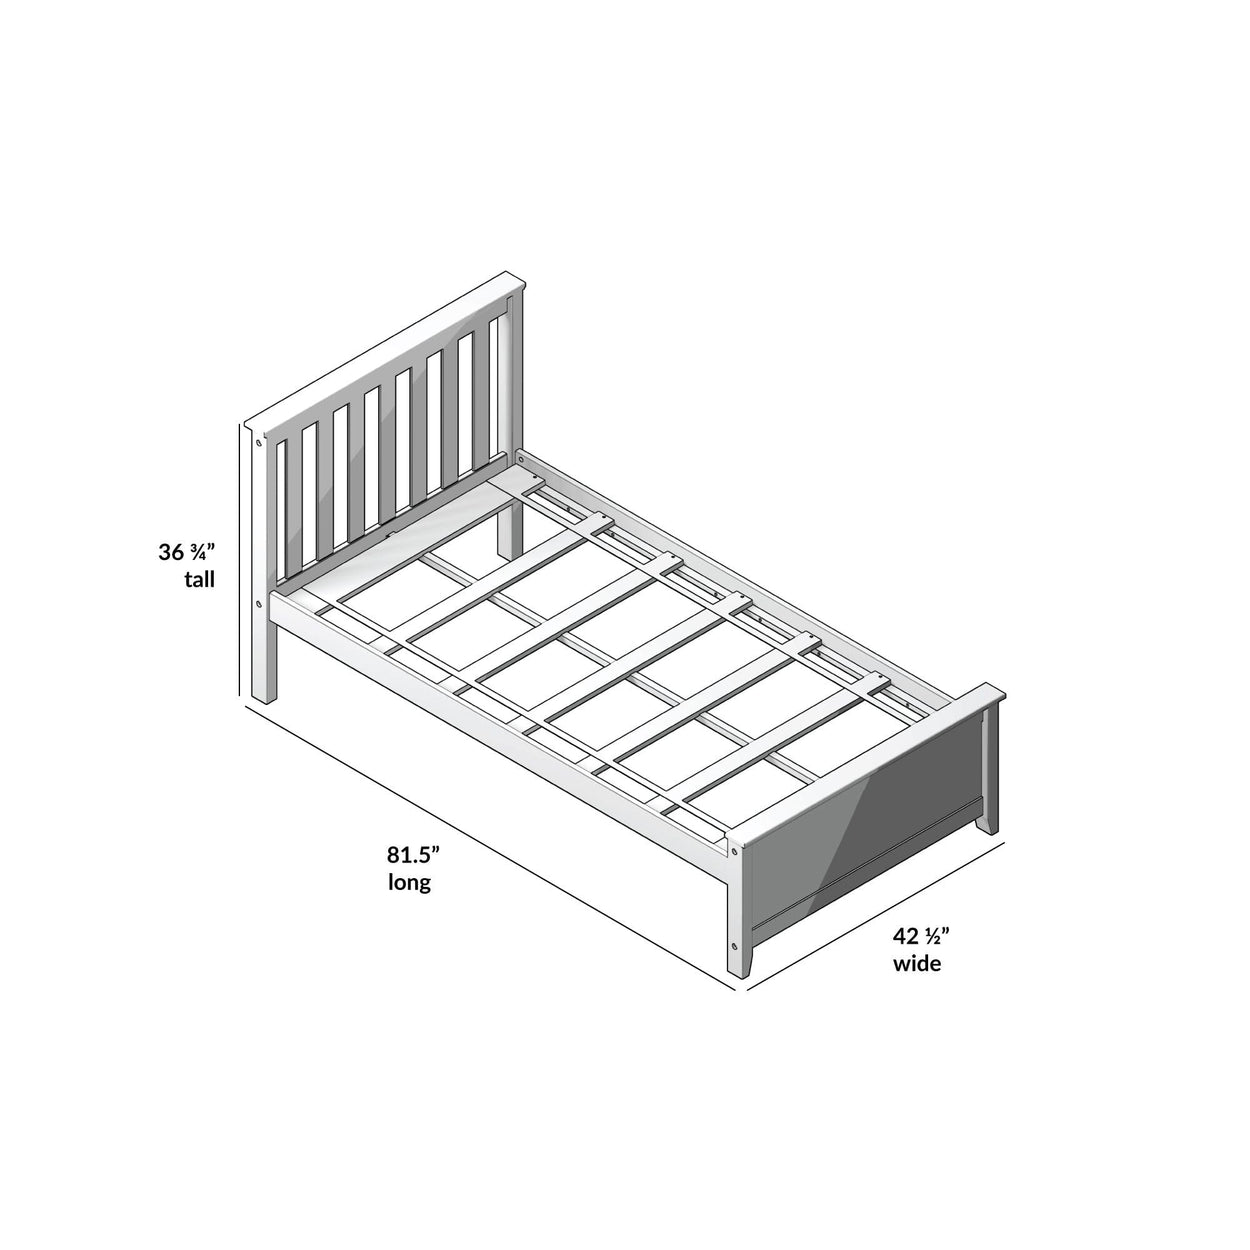 180210005109 : Kids Beds Twin Bed with Single Guard Rail, Espresso